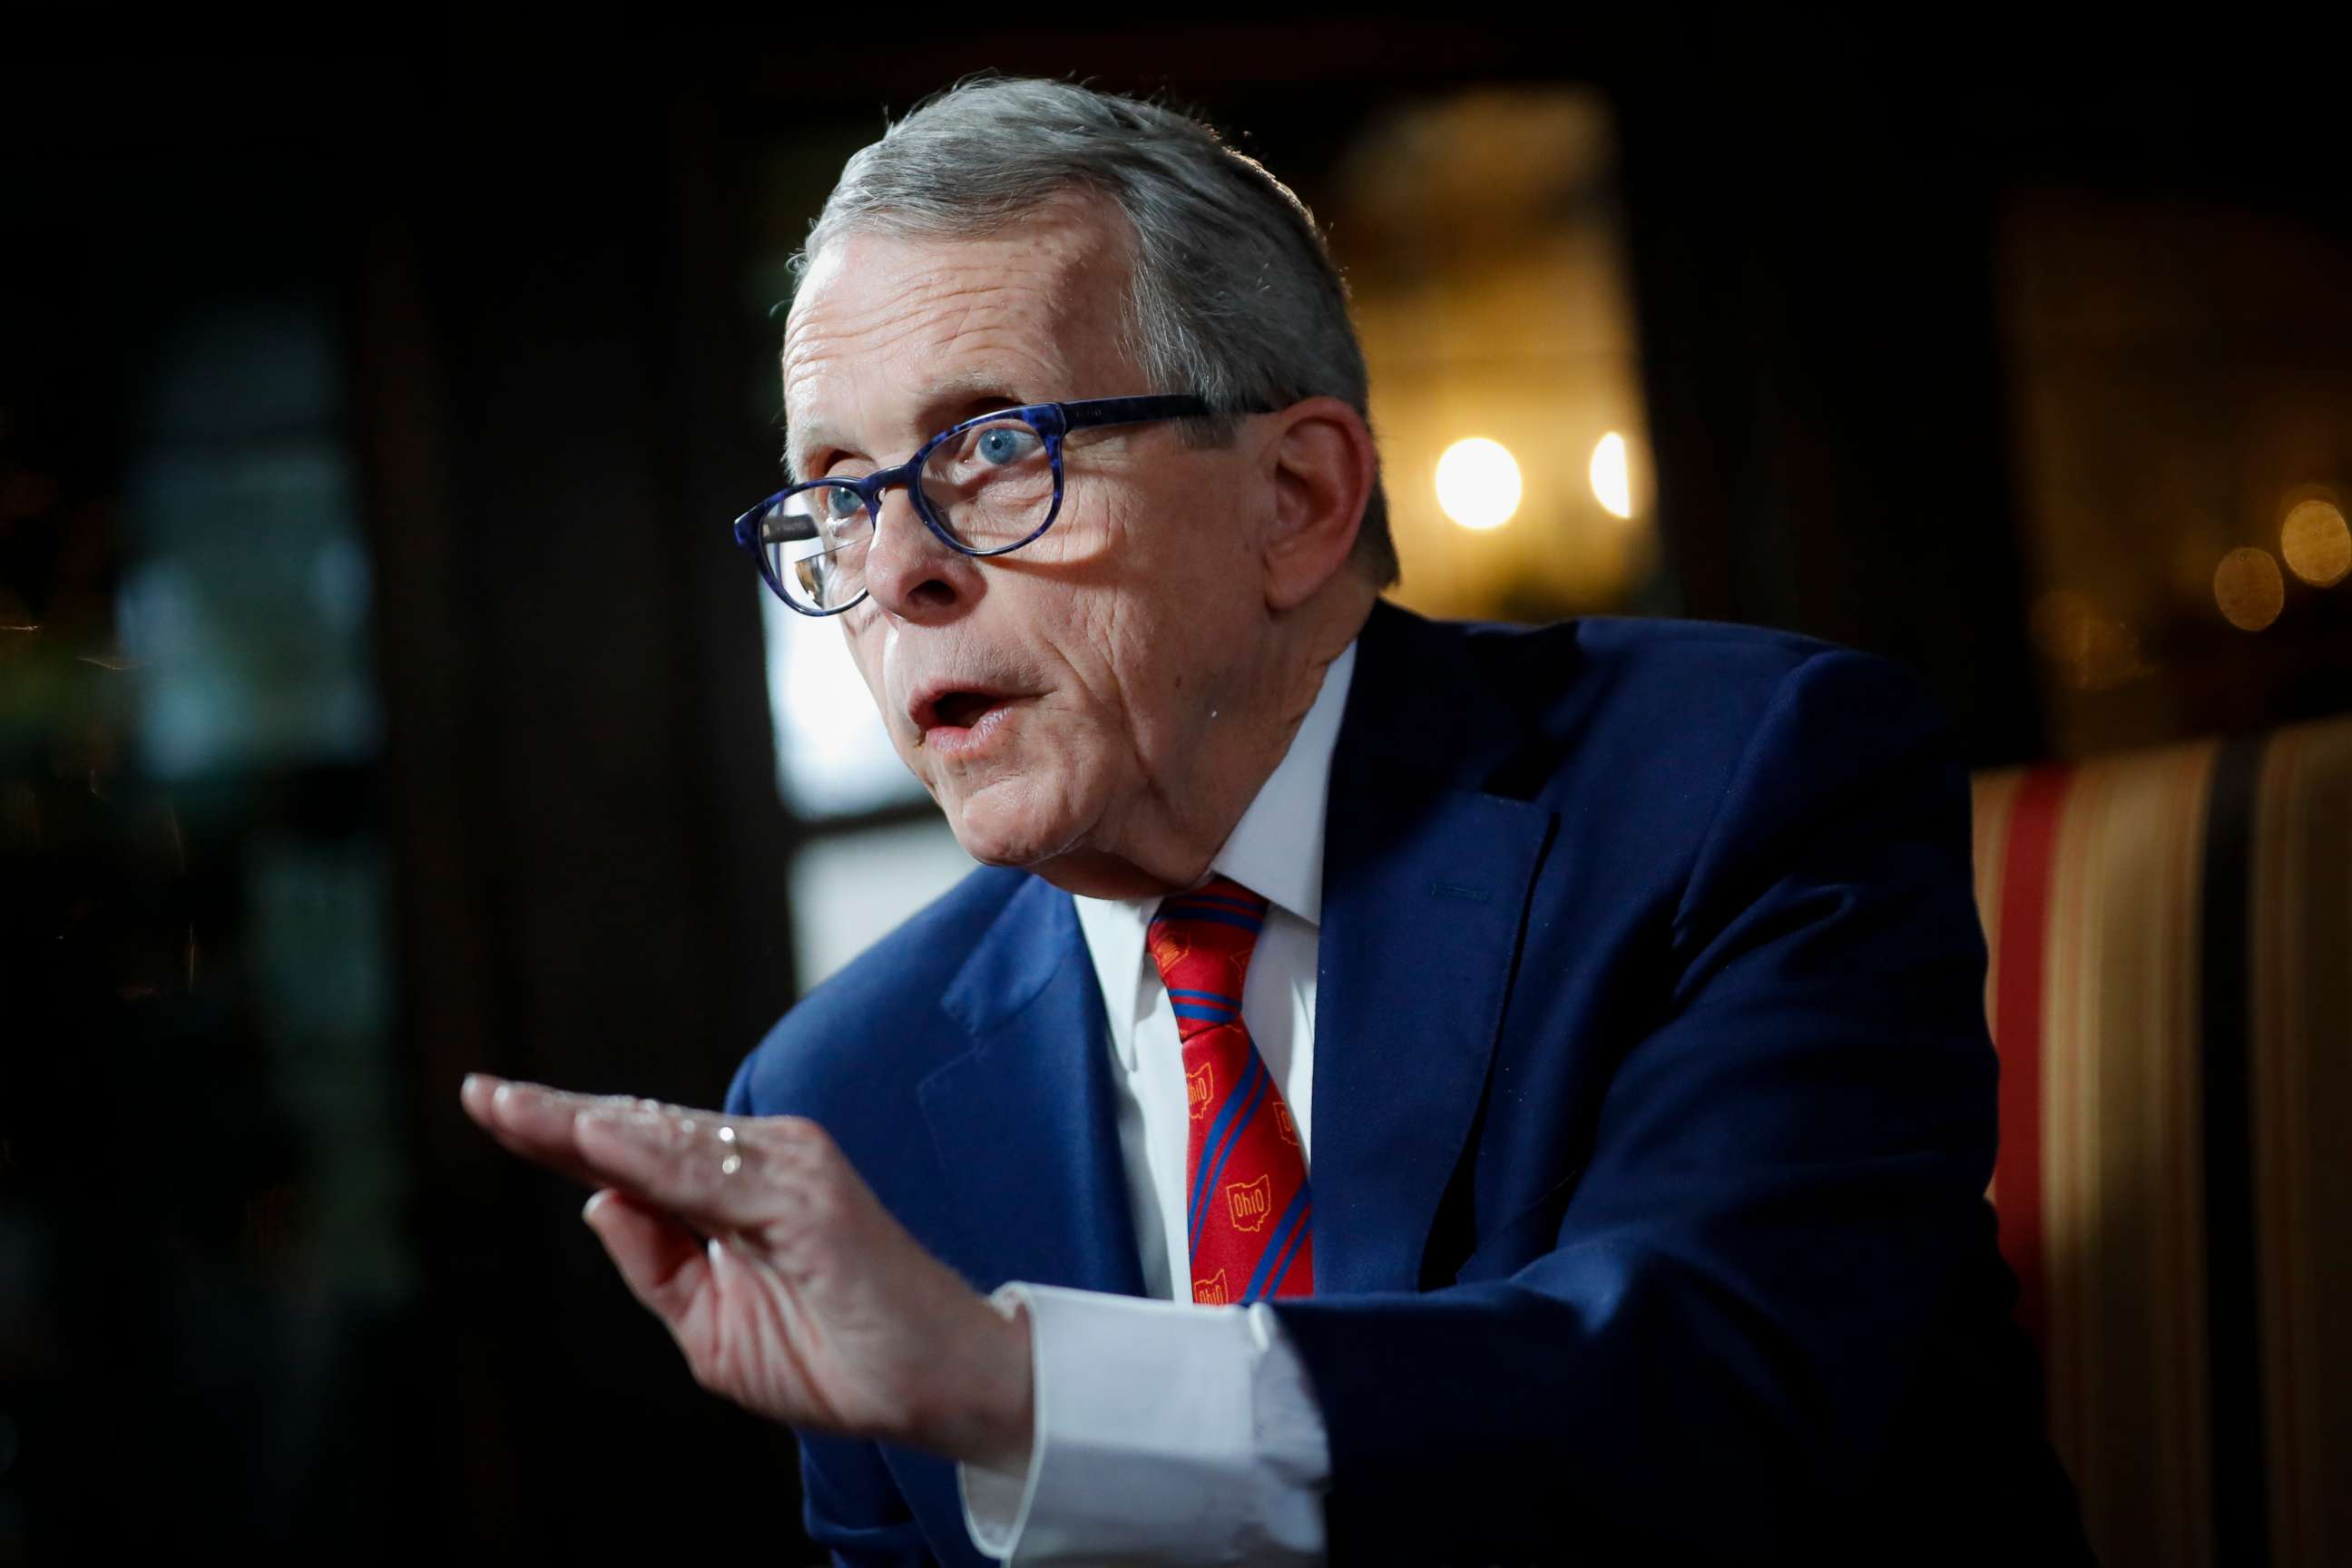 PHOTO: Ohio Gov. Mike DeWine speaks about his plans for the coming year during an interview at the Governor's Residence in Columbus, Ohio.